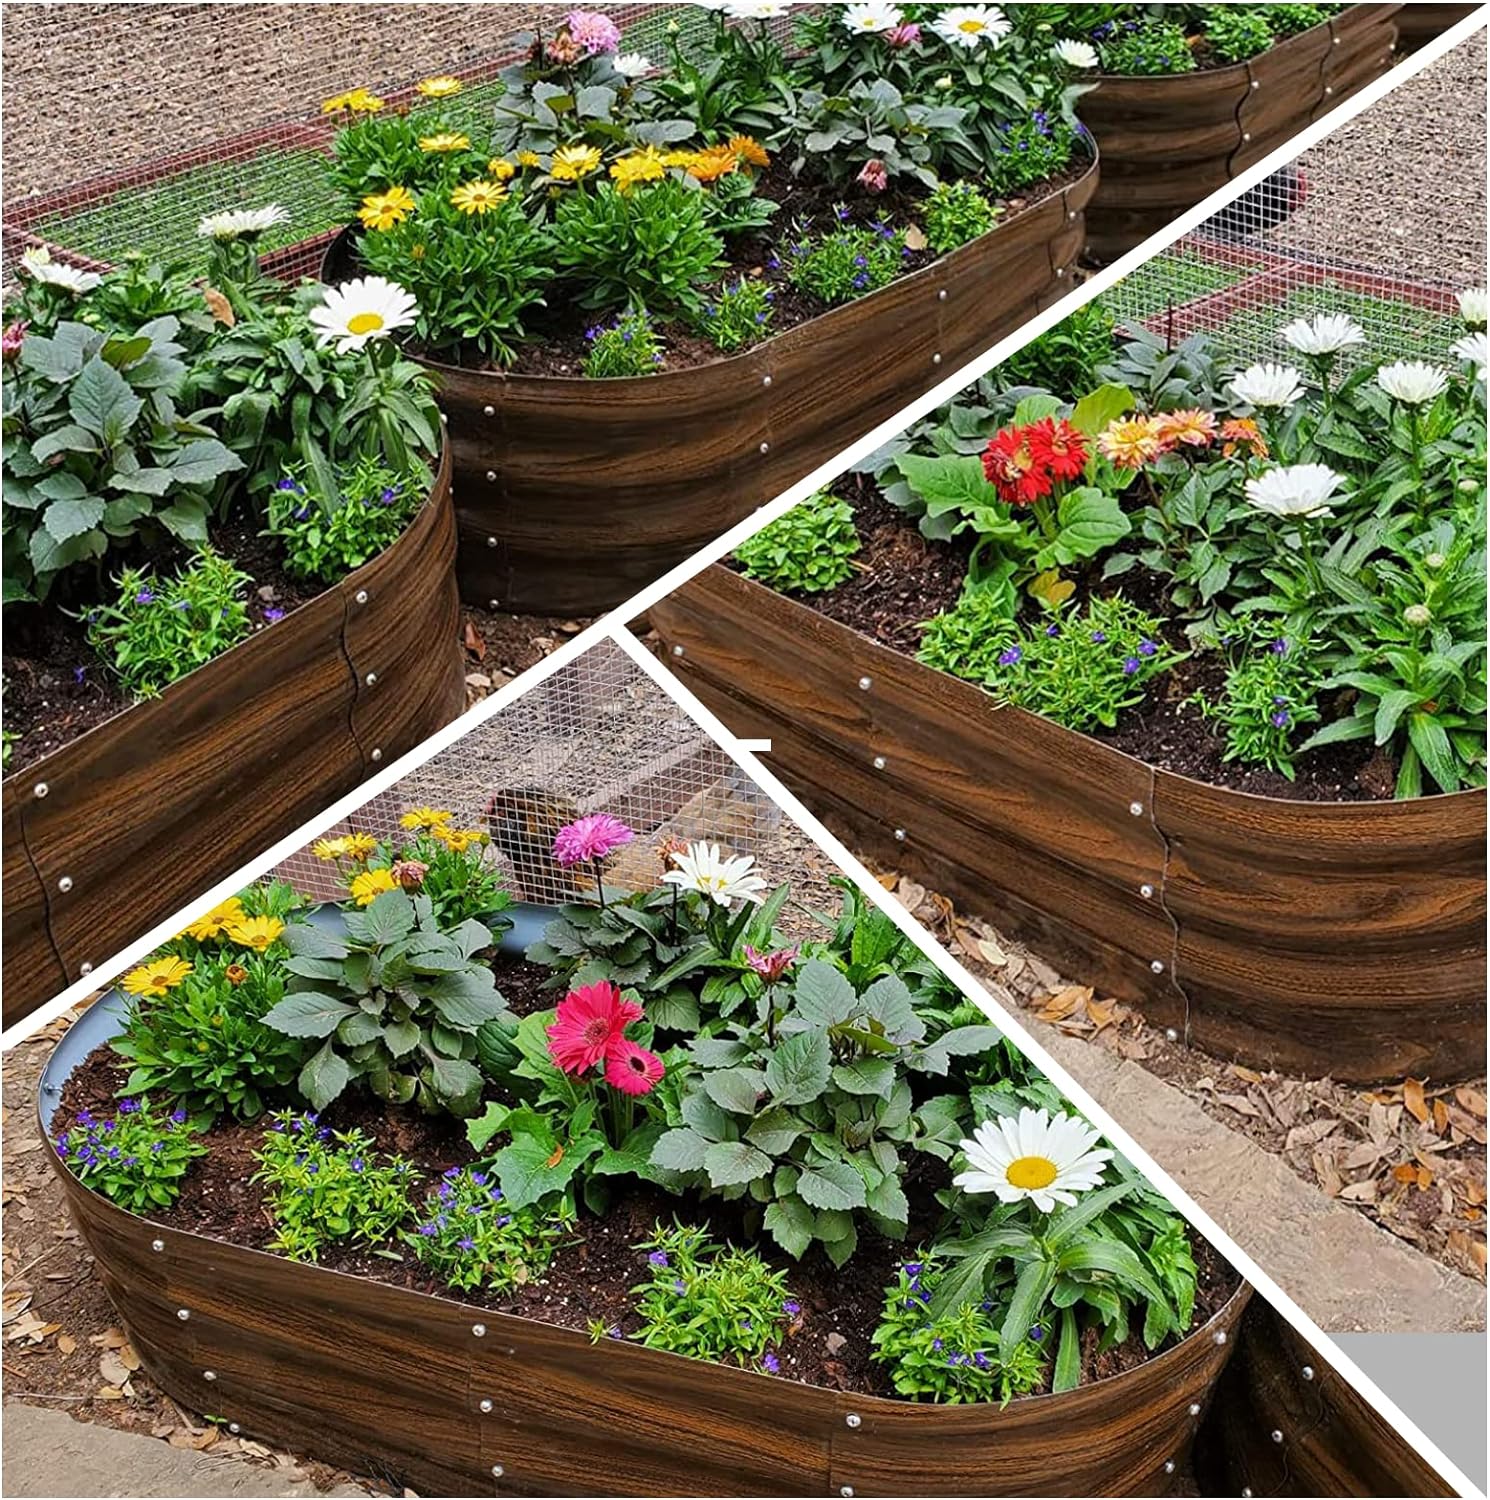 Galvanized Raised Garden Bed Outdoor, 2 Pcs 4x2x1ft Oval Metal Planter Box for Planting Plants Vegetables, Brown Massage Lab